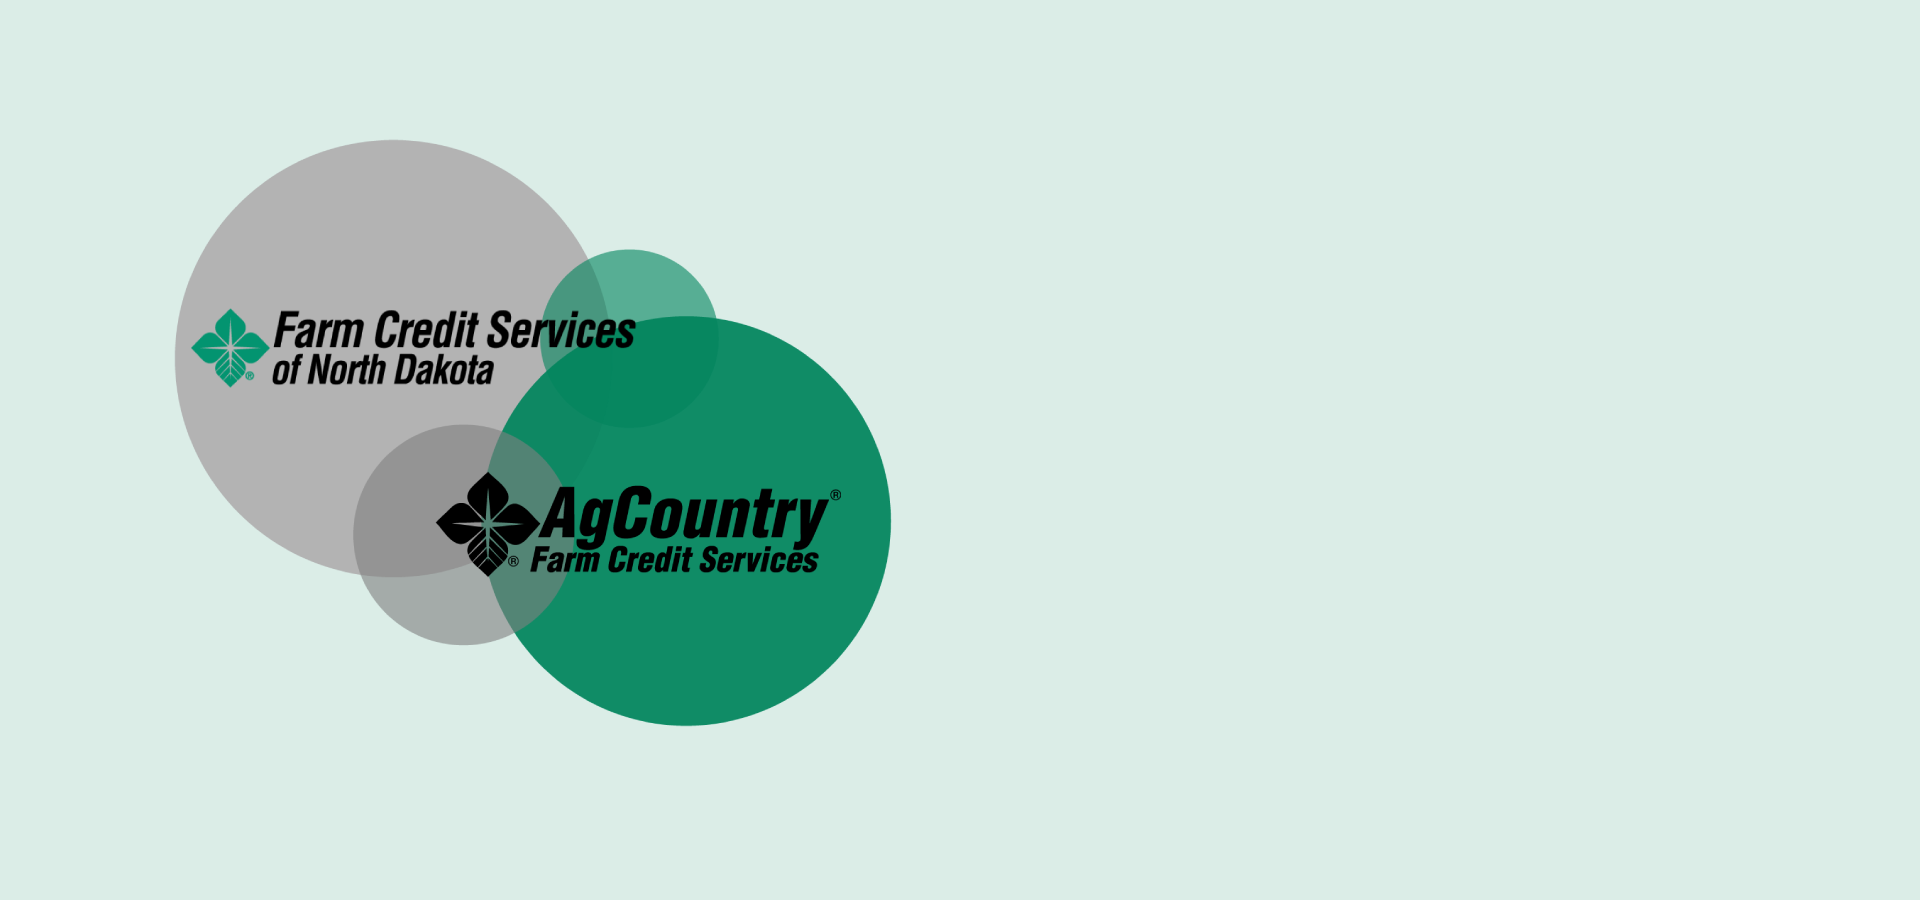 A couple thought bubbles with the AgCountry logo in the center